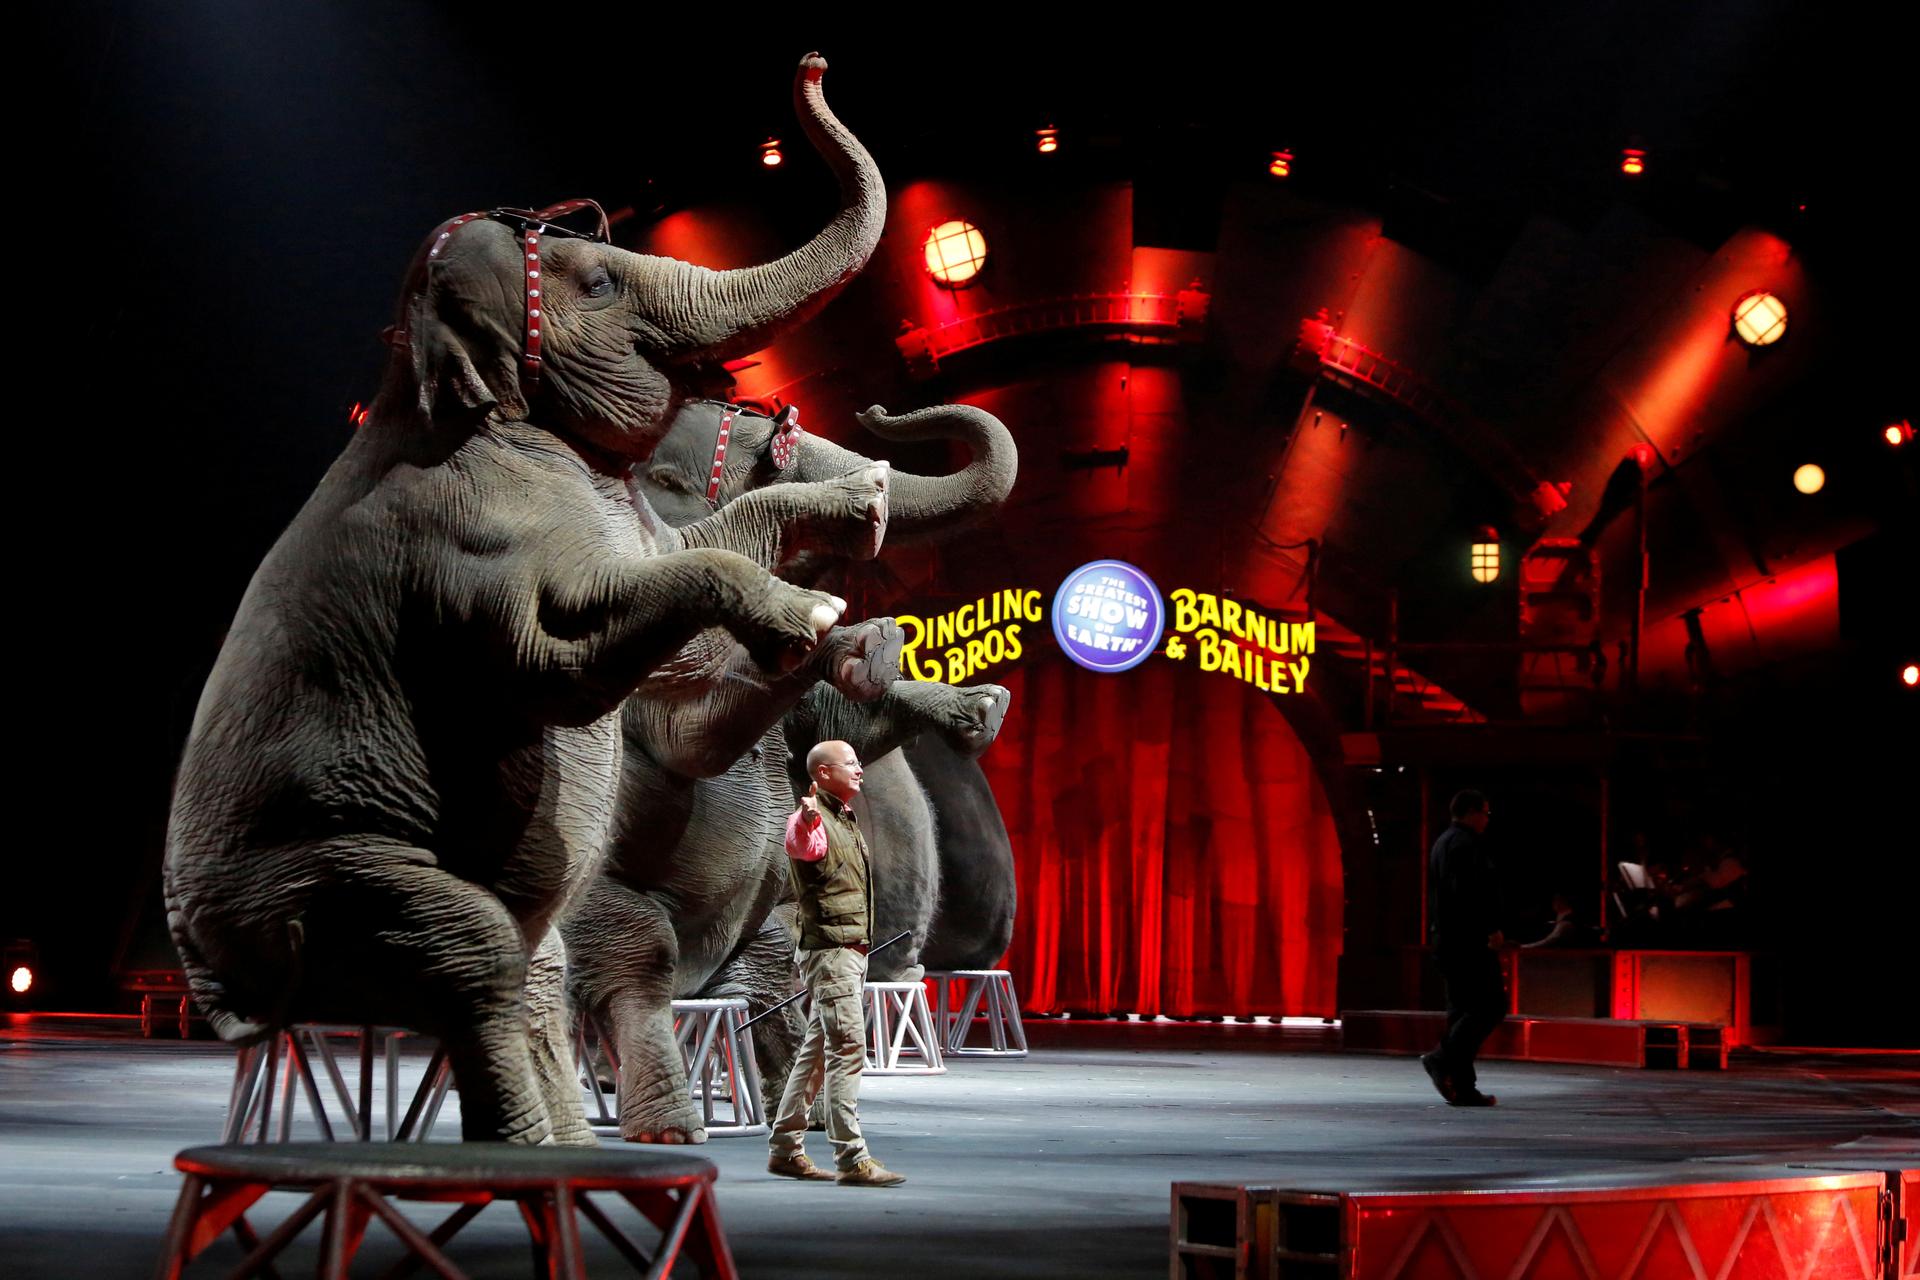 Elephants perform during Ringling Bros and Barnum & Bailey Circus' "Circus Extreme" show at the Mohegan Sun Arena at Casey Plaza in Wilkes-Barre, Pennsylvania, U.S., April 30, 2016.